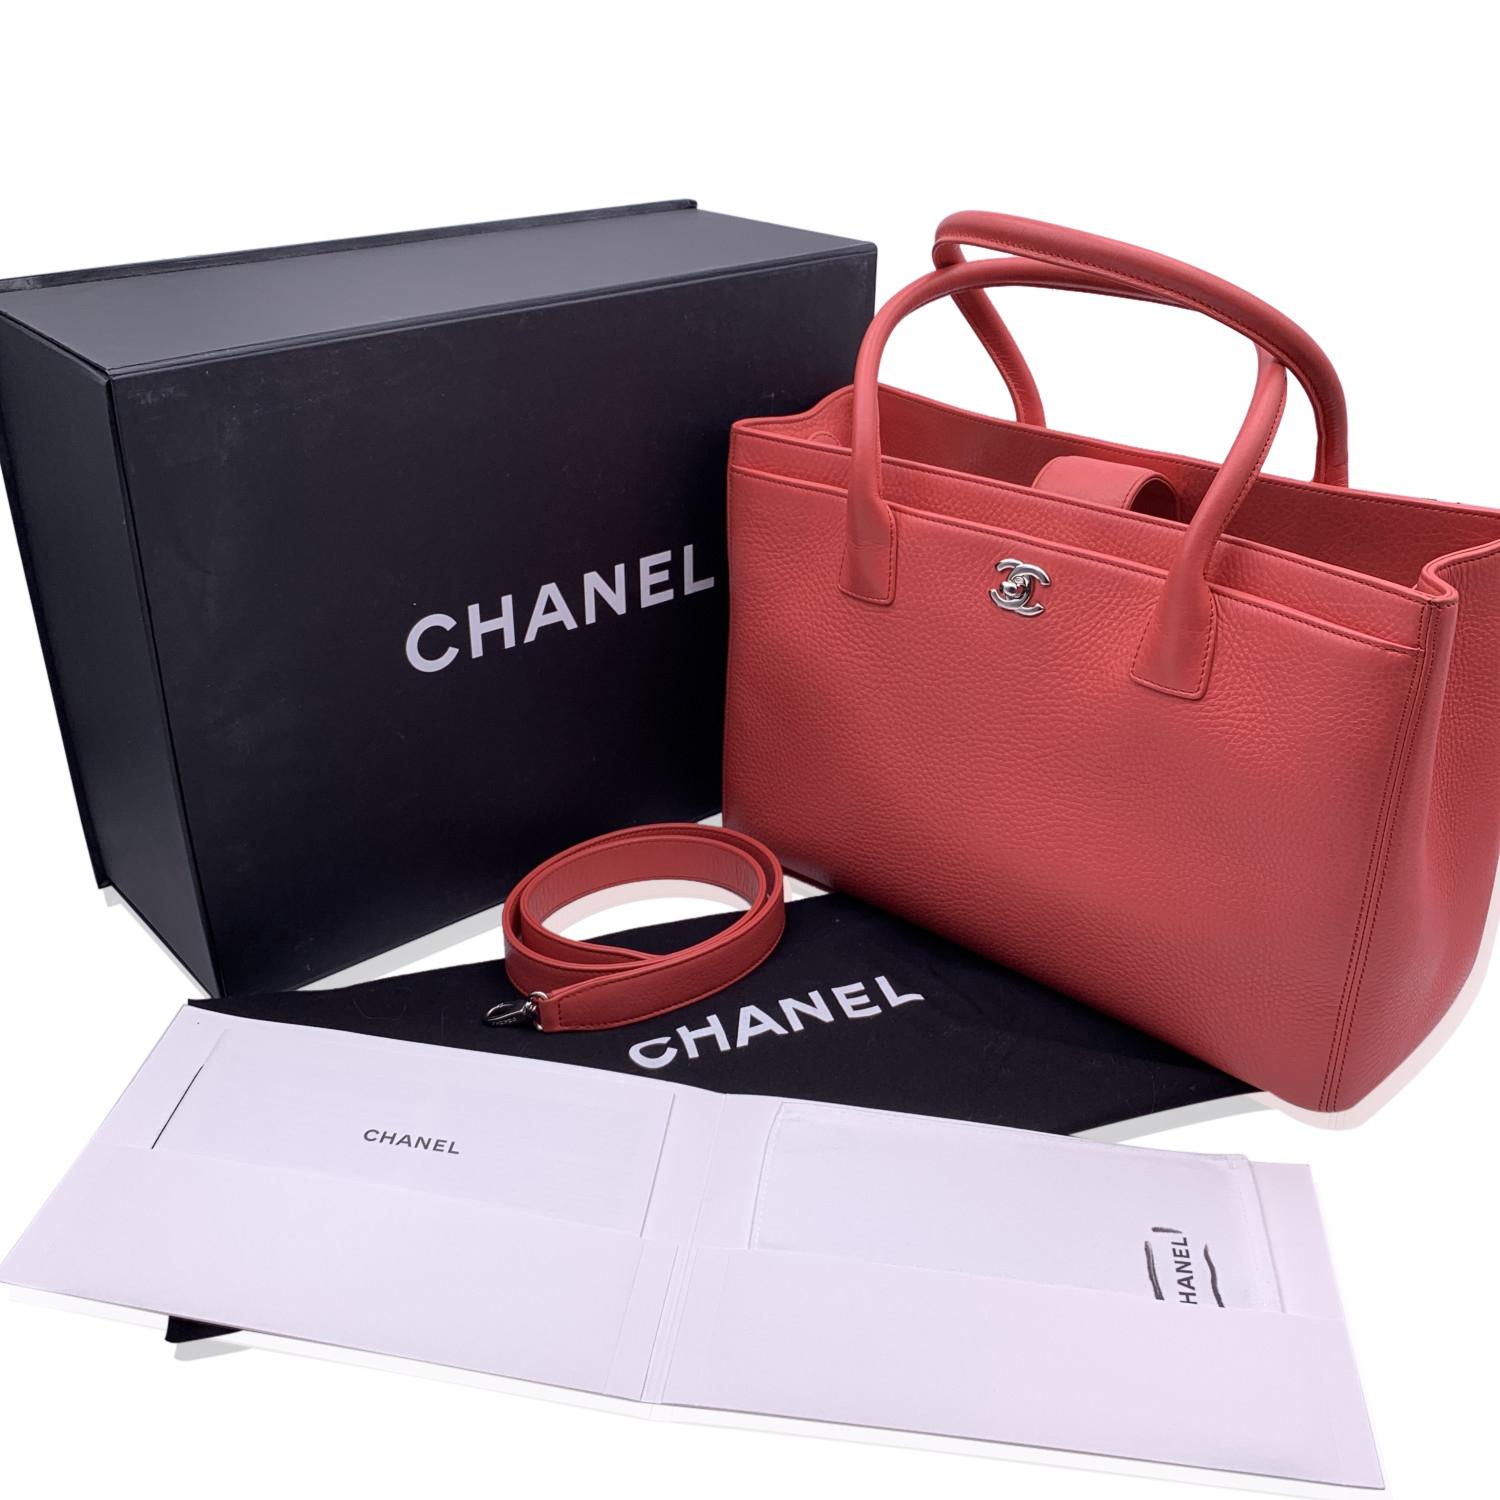 Chanel Executive Totes - For Sale on 1stDibs  chanel executive tote price,  chanel neo executive tote, chanel executive cerf tote